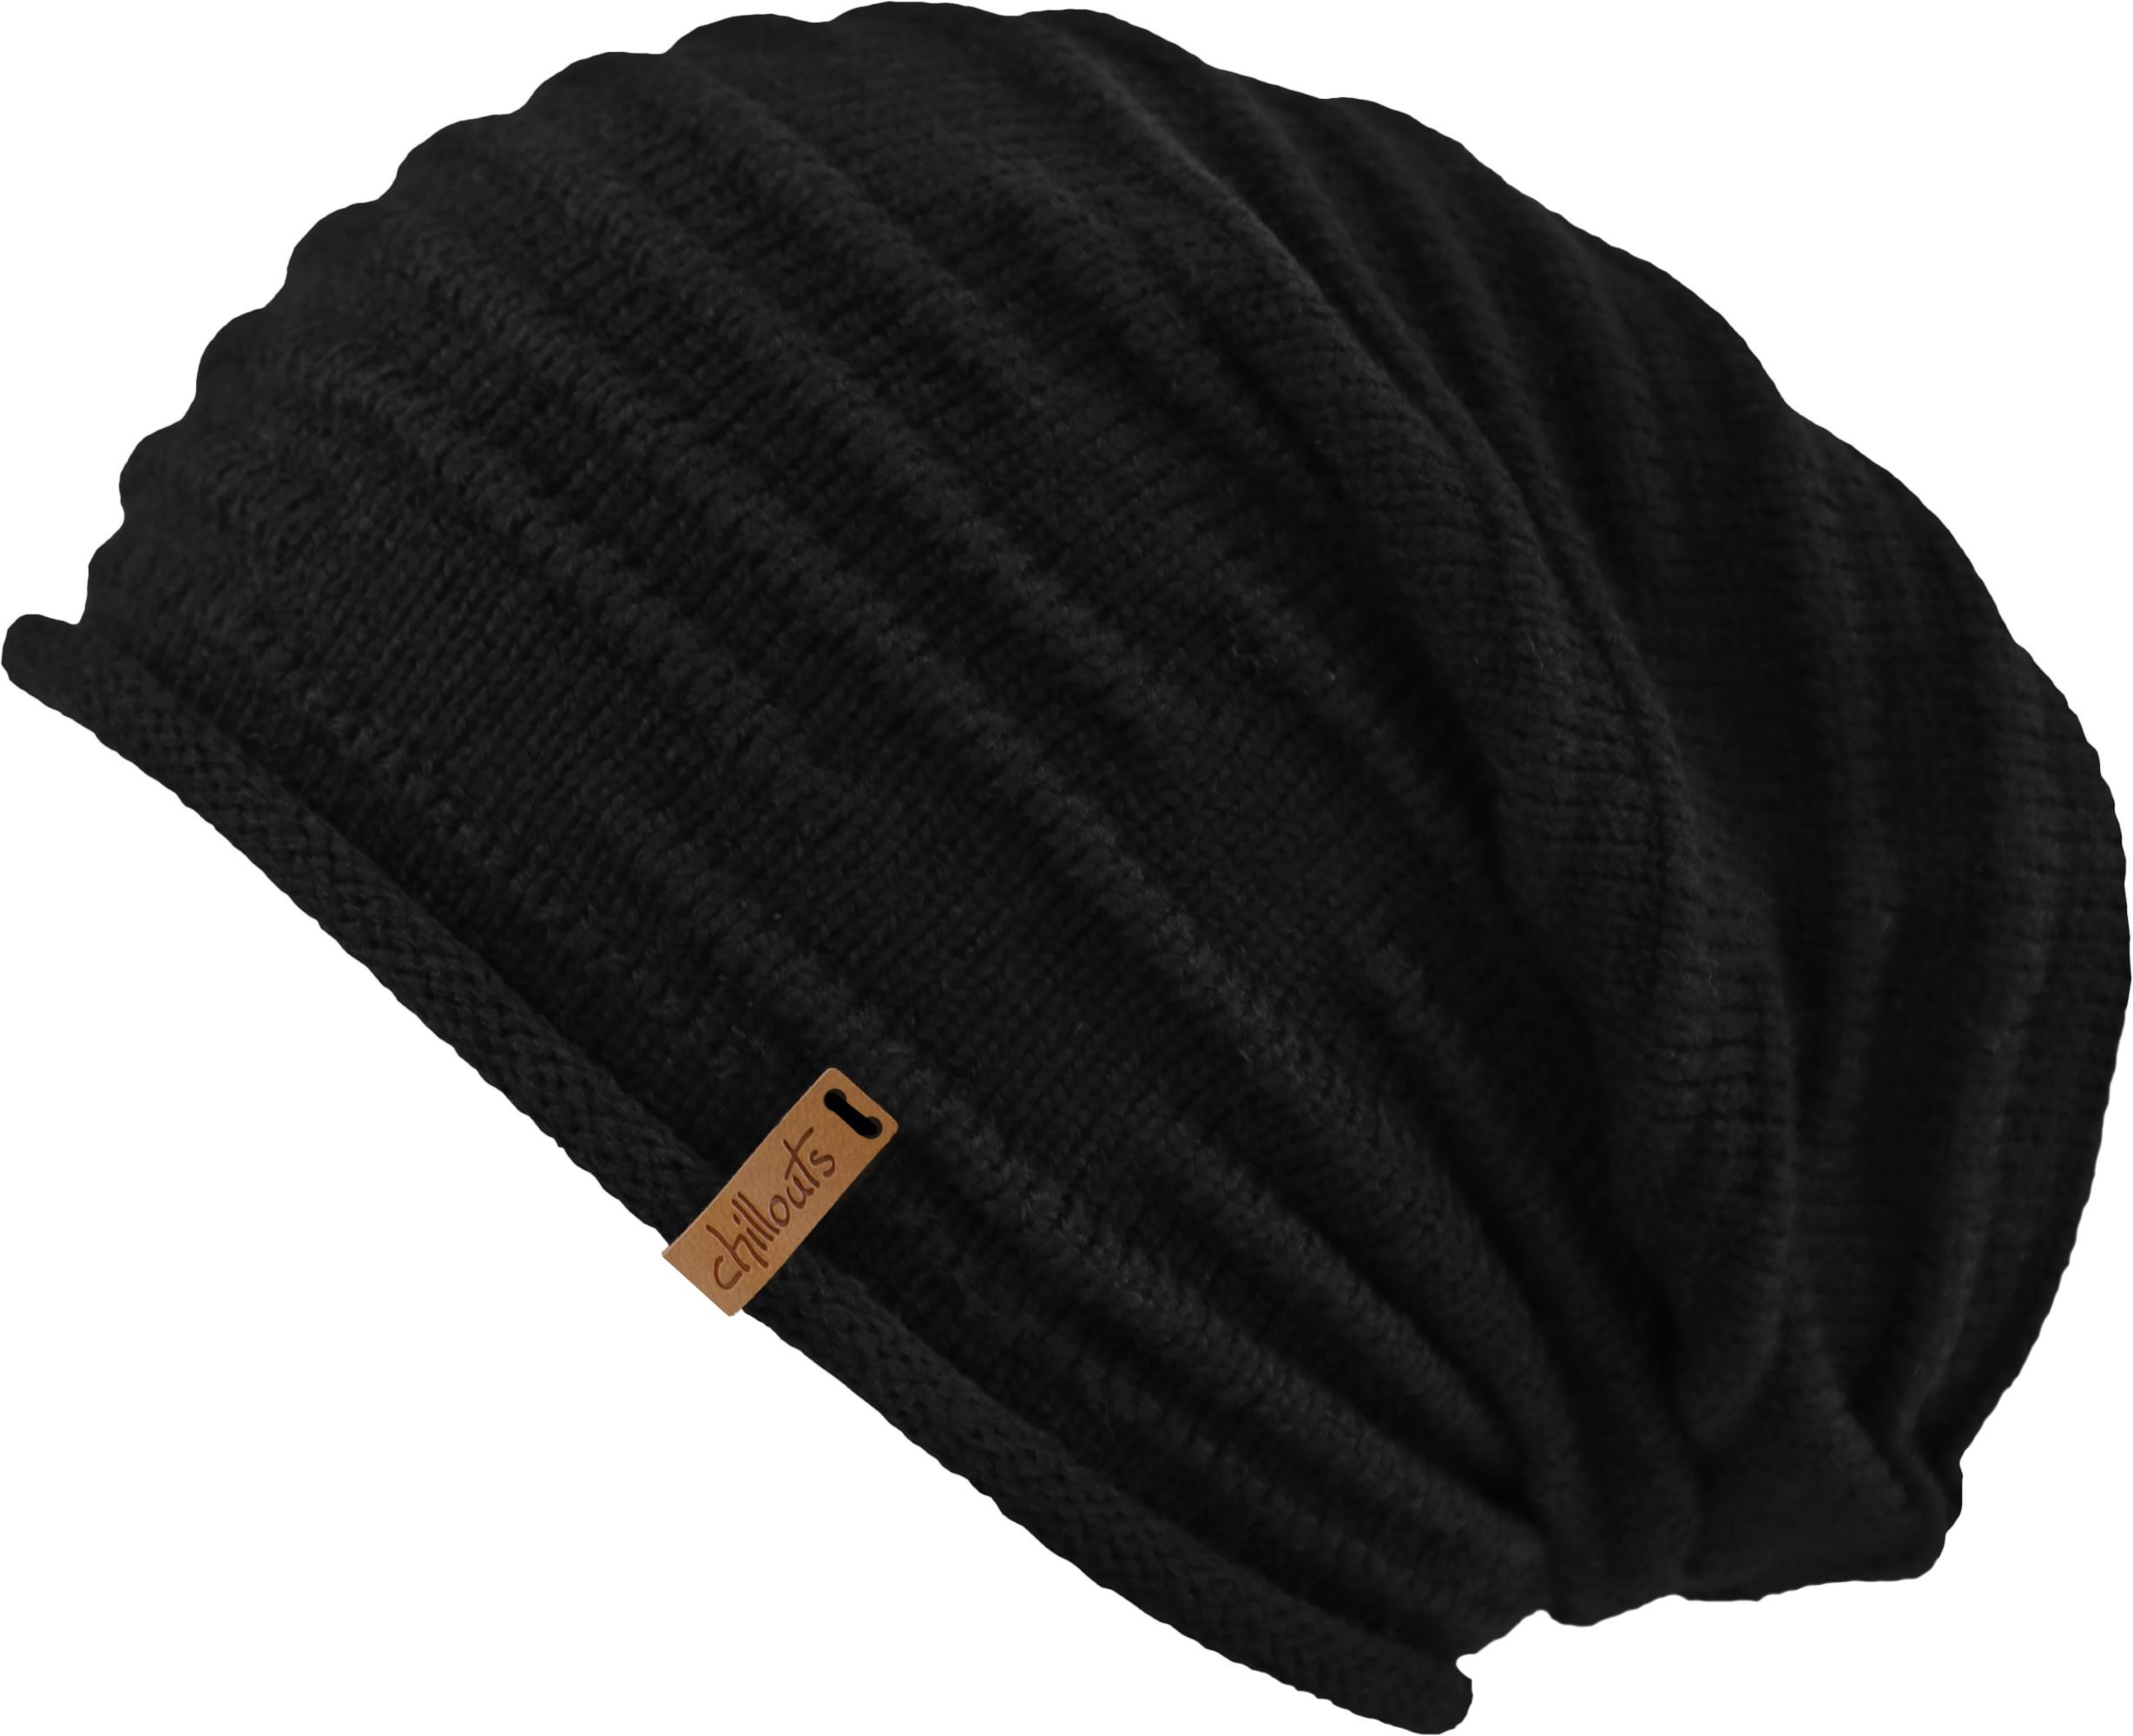 Aaron Hat 01 Black Beanie Chillouts 